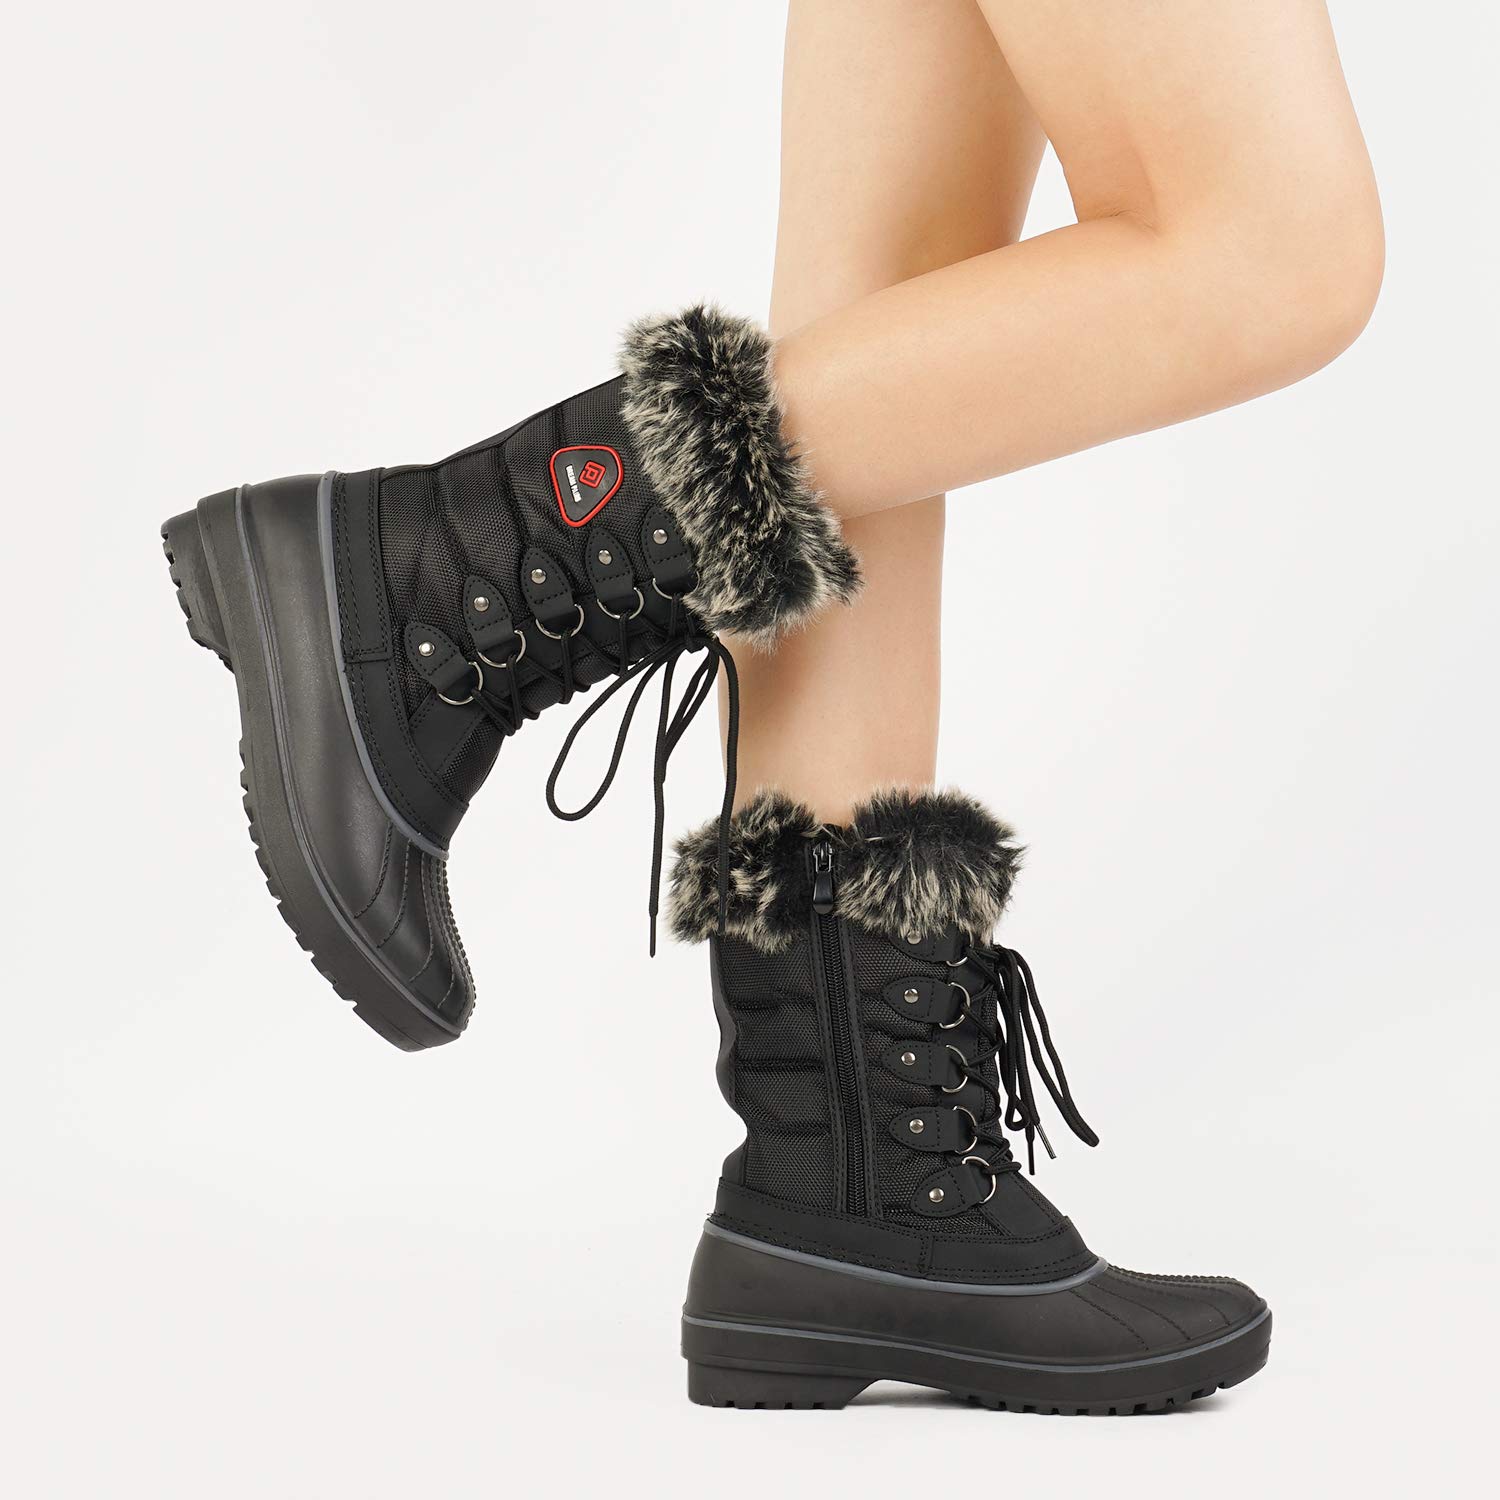 DREAM PAIRS Women's Warm Faux Fur Lined Mid Calf Winter Snow Boots